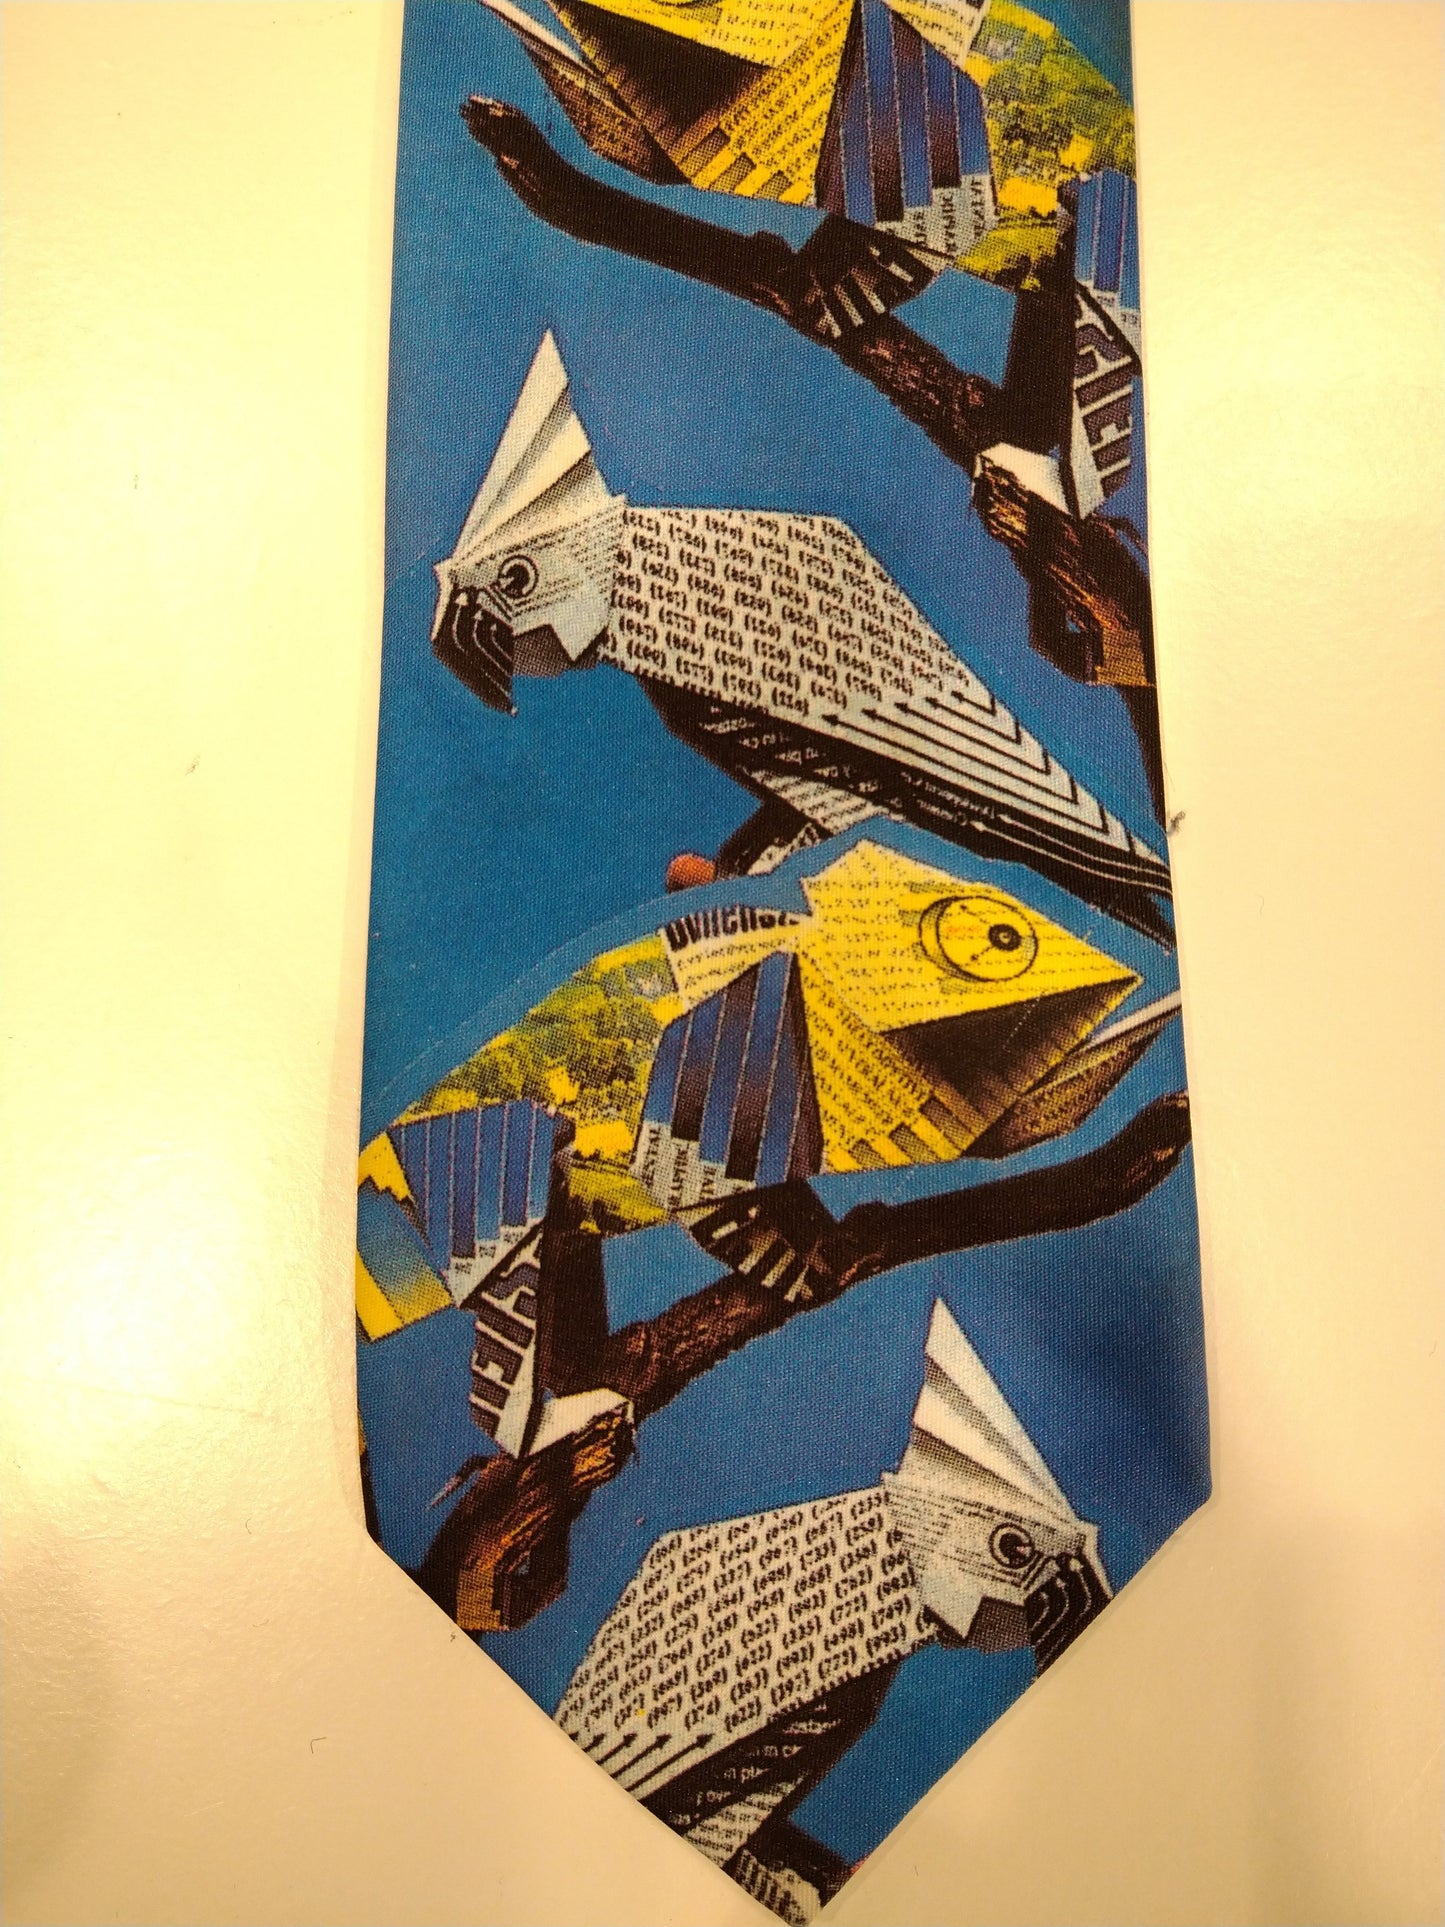 Vintage Rooymans Specials tie. Blue with chameleon / parrot motif.